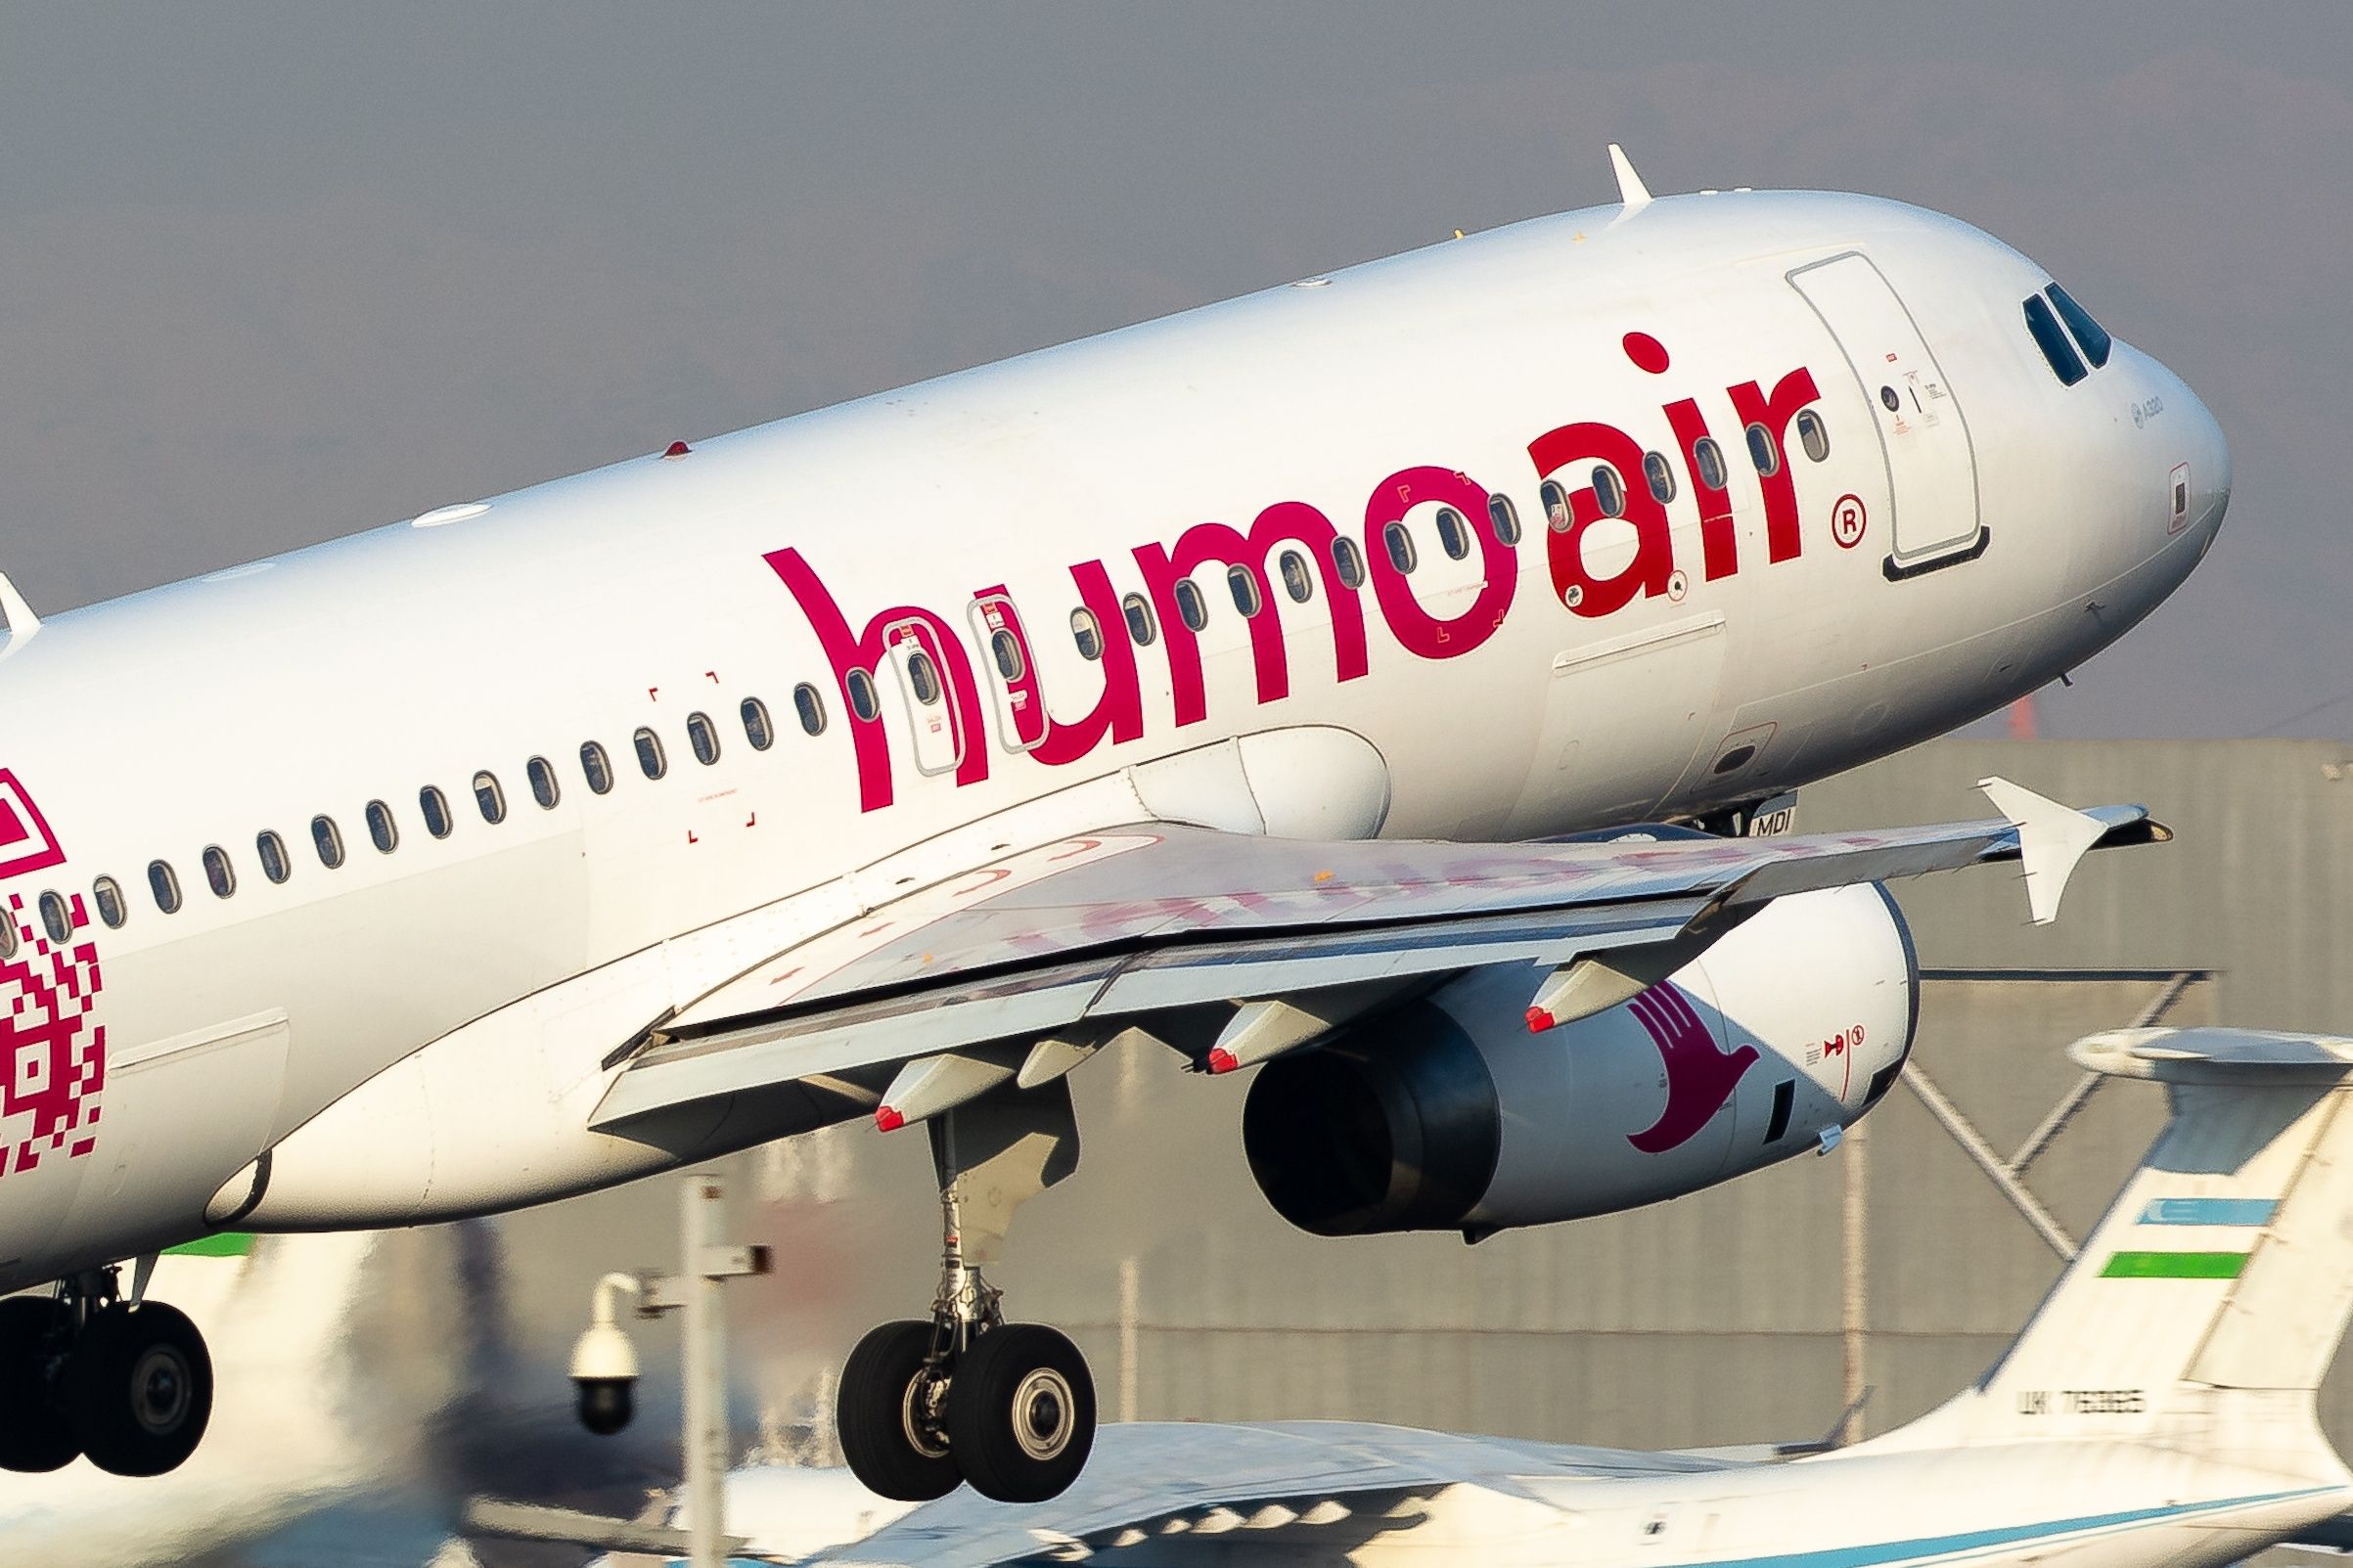 HUMO Air Airbus A320 taking off